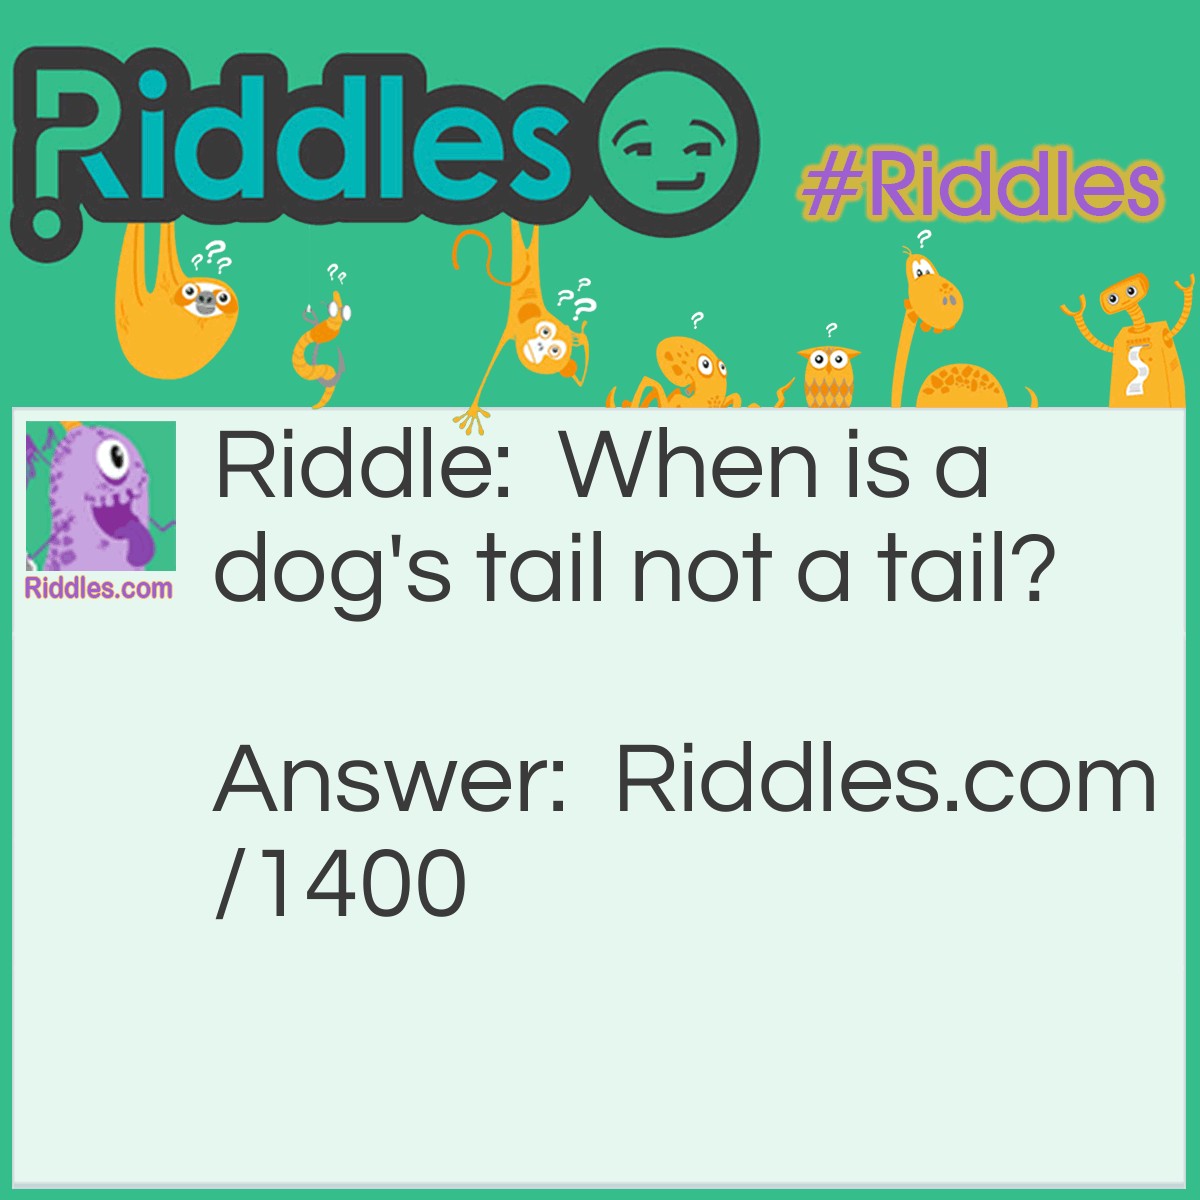 Riddle: When is a dog's tail not a tail? Answer: When it's a wag'n